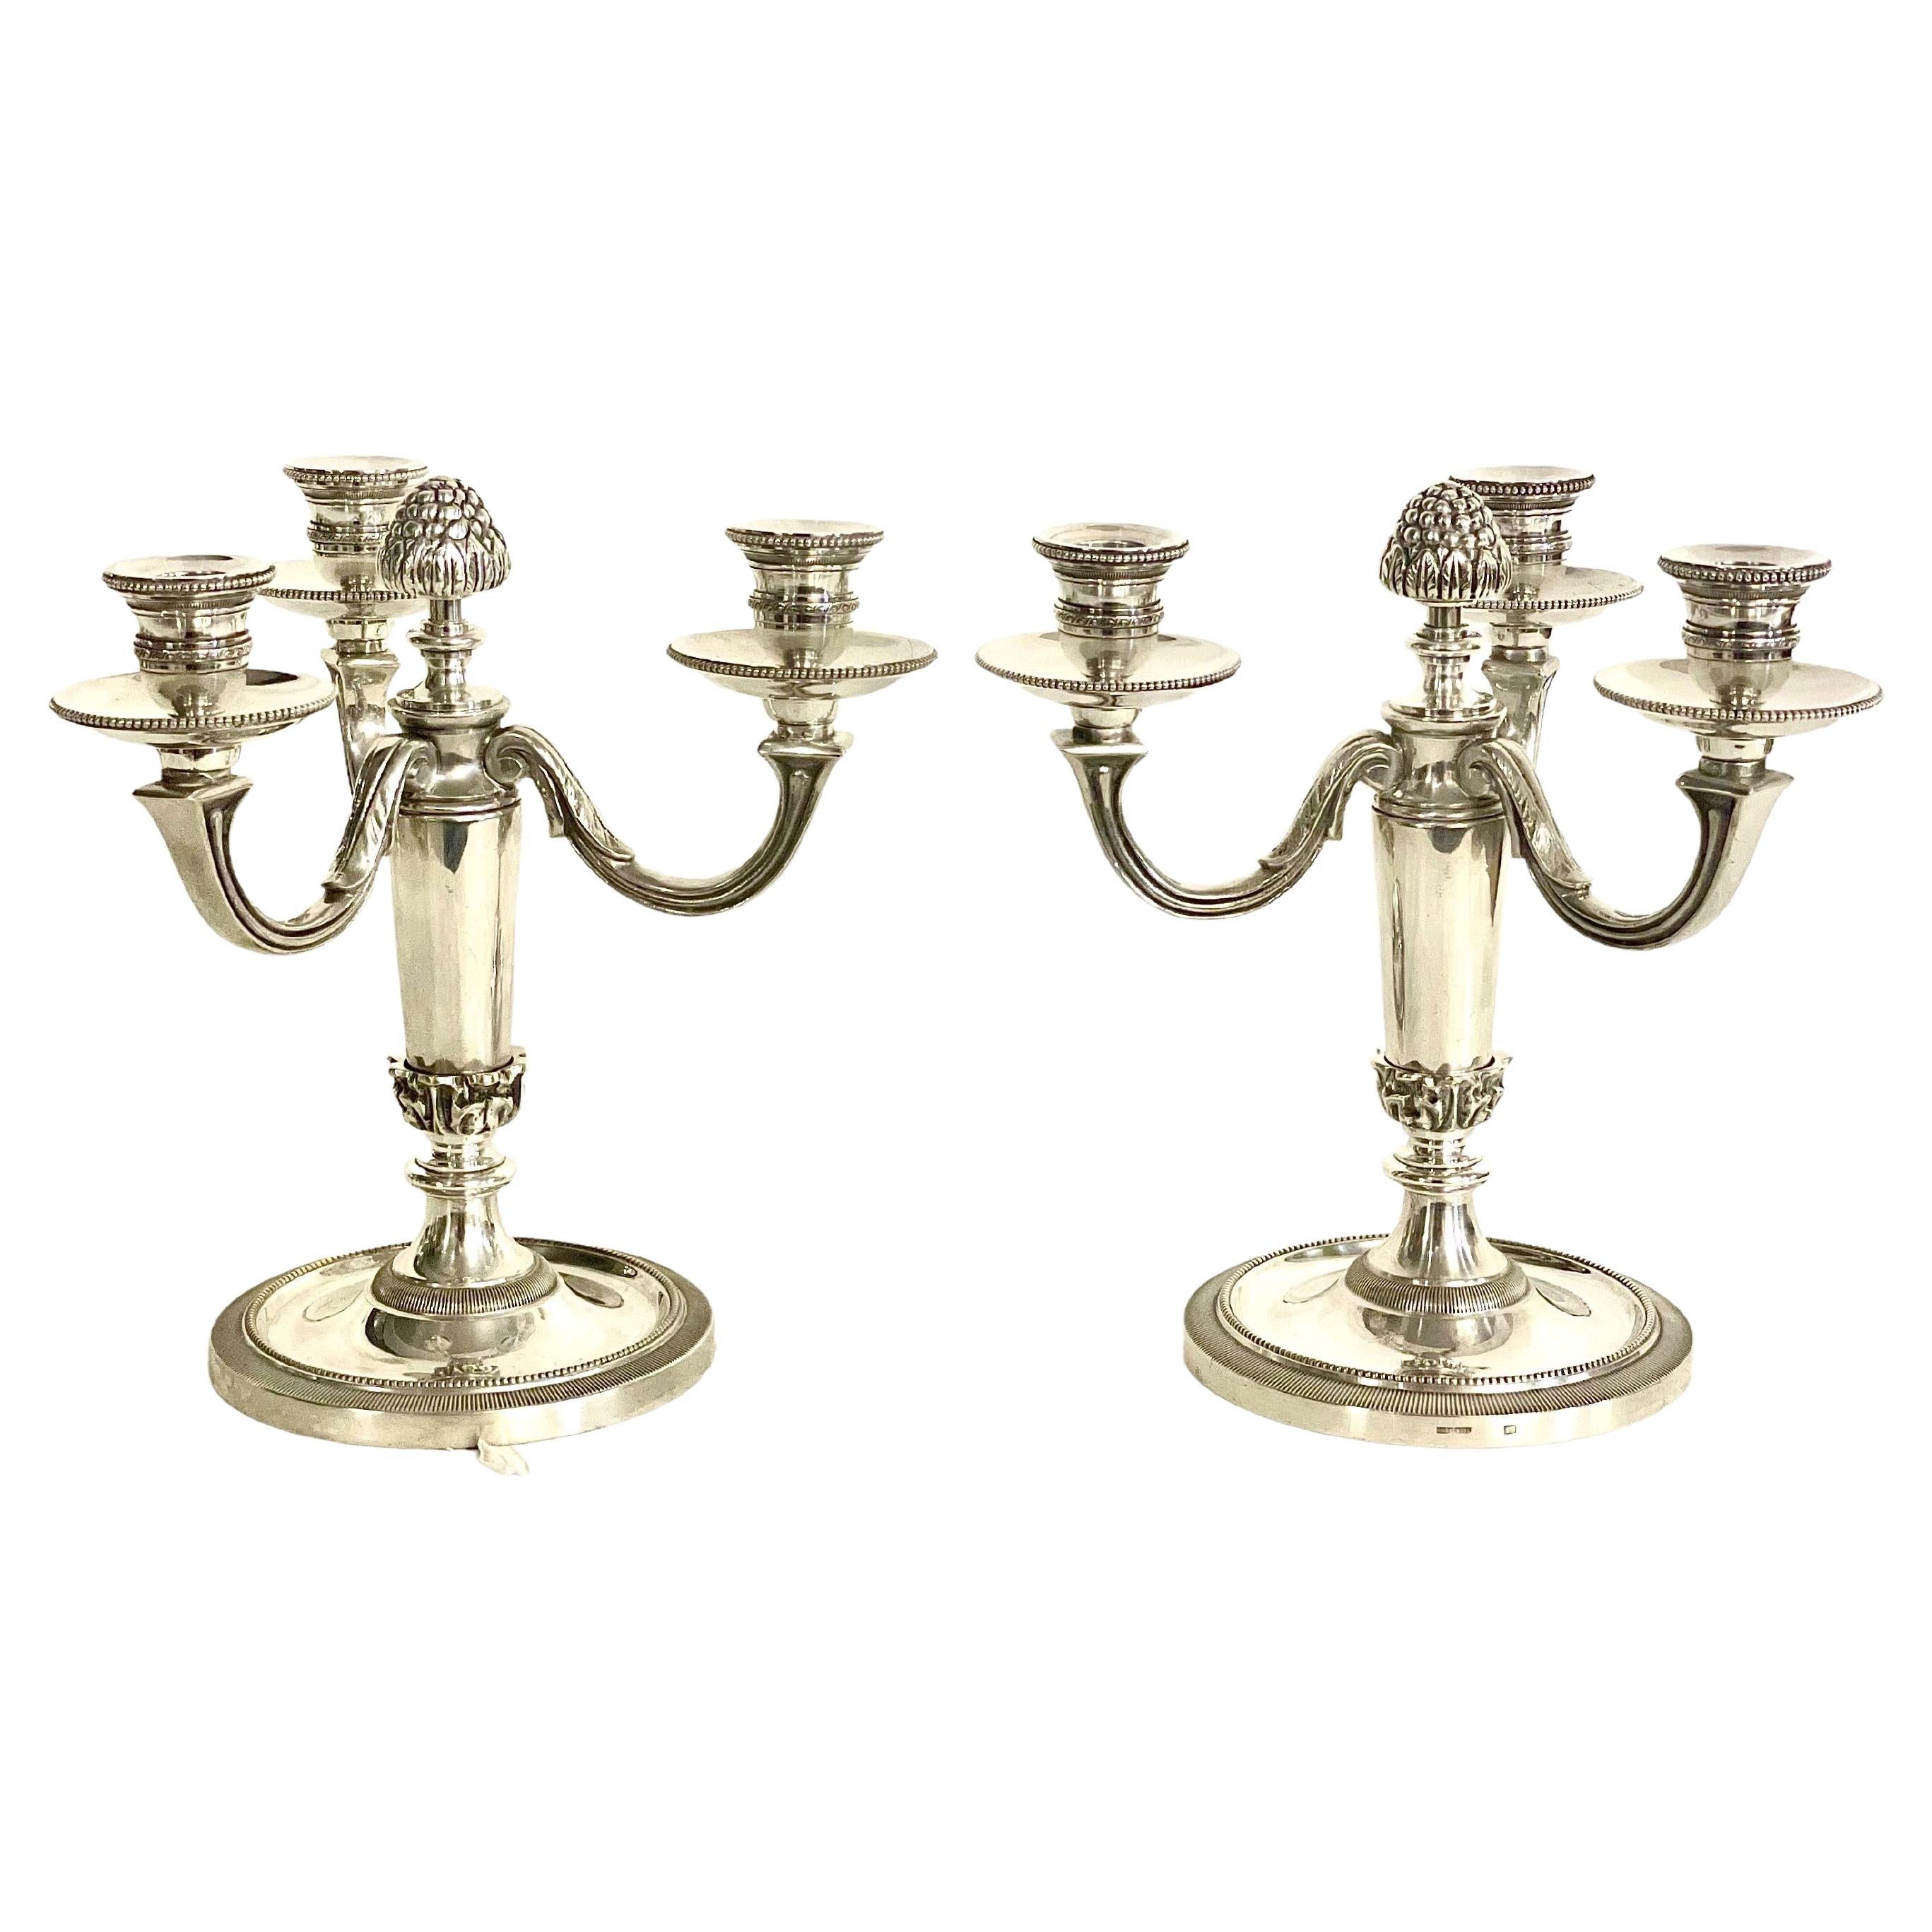 19th Century Silver-Plated Chrysalia 3 light Candelabras For Sale